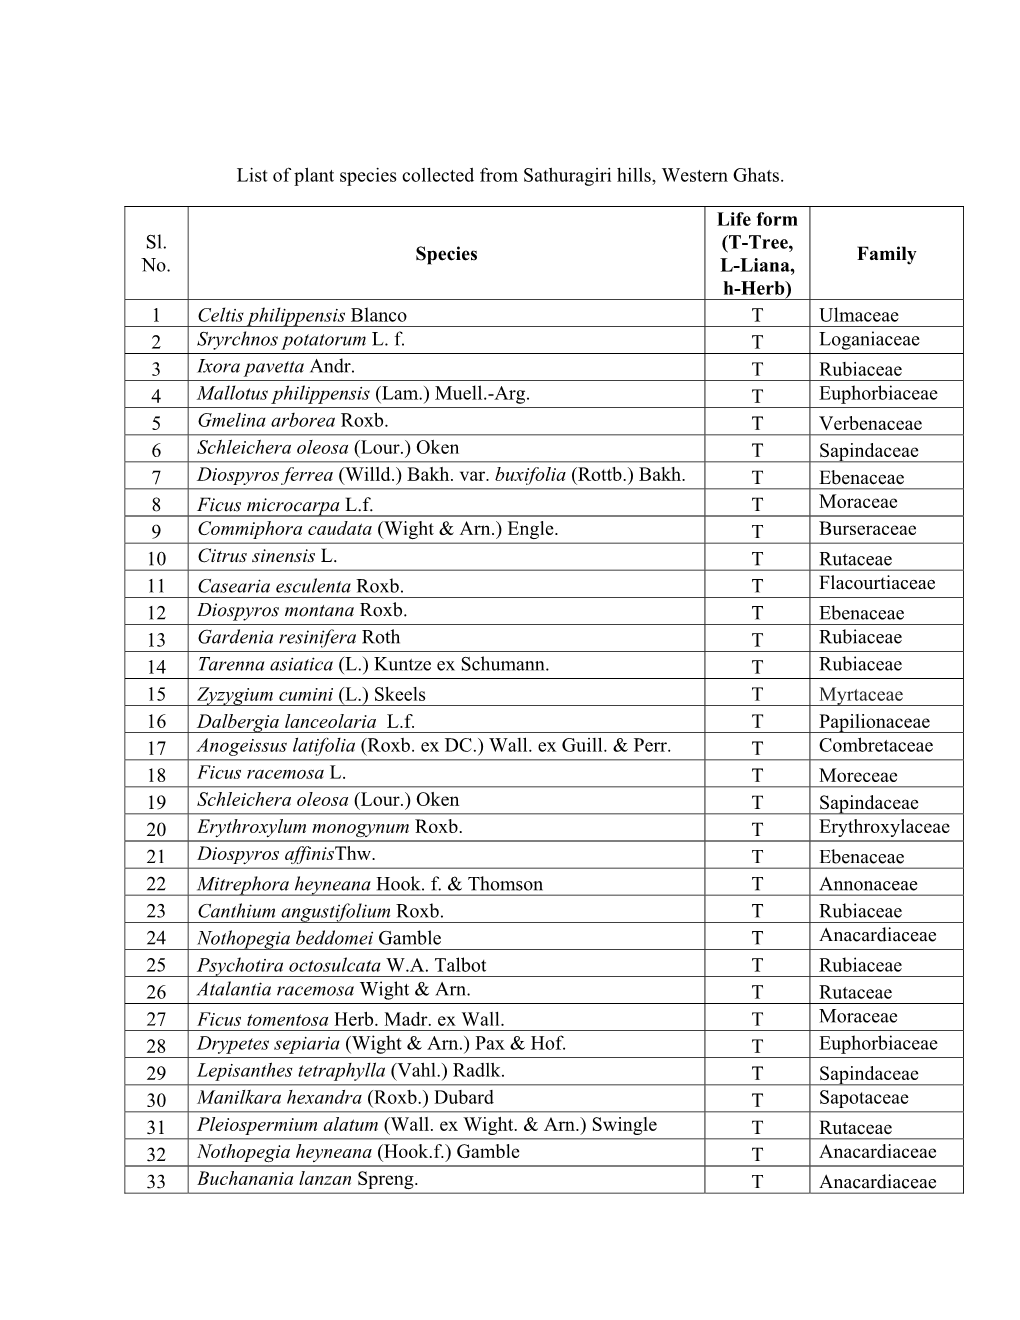 List of Plant Species Collected from Sathuragiri Hills, Western Ghats